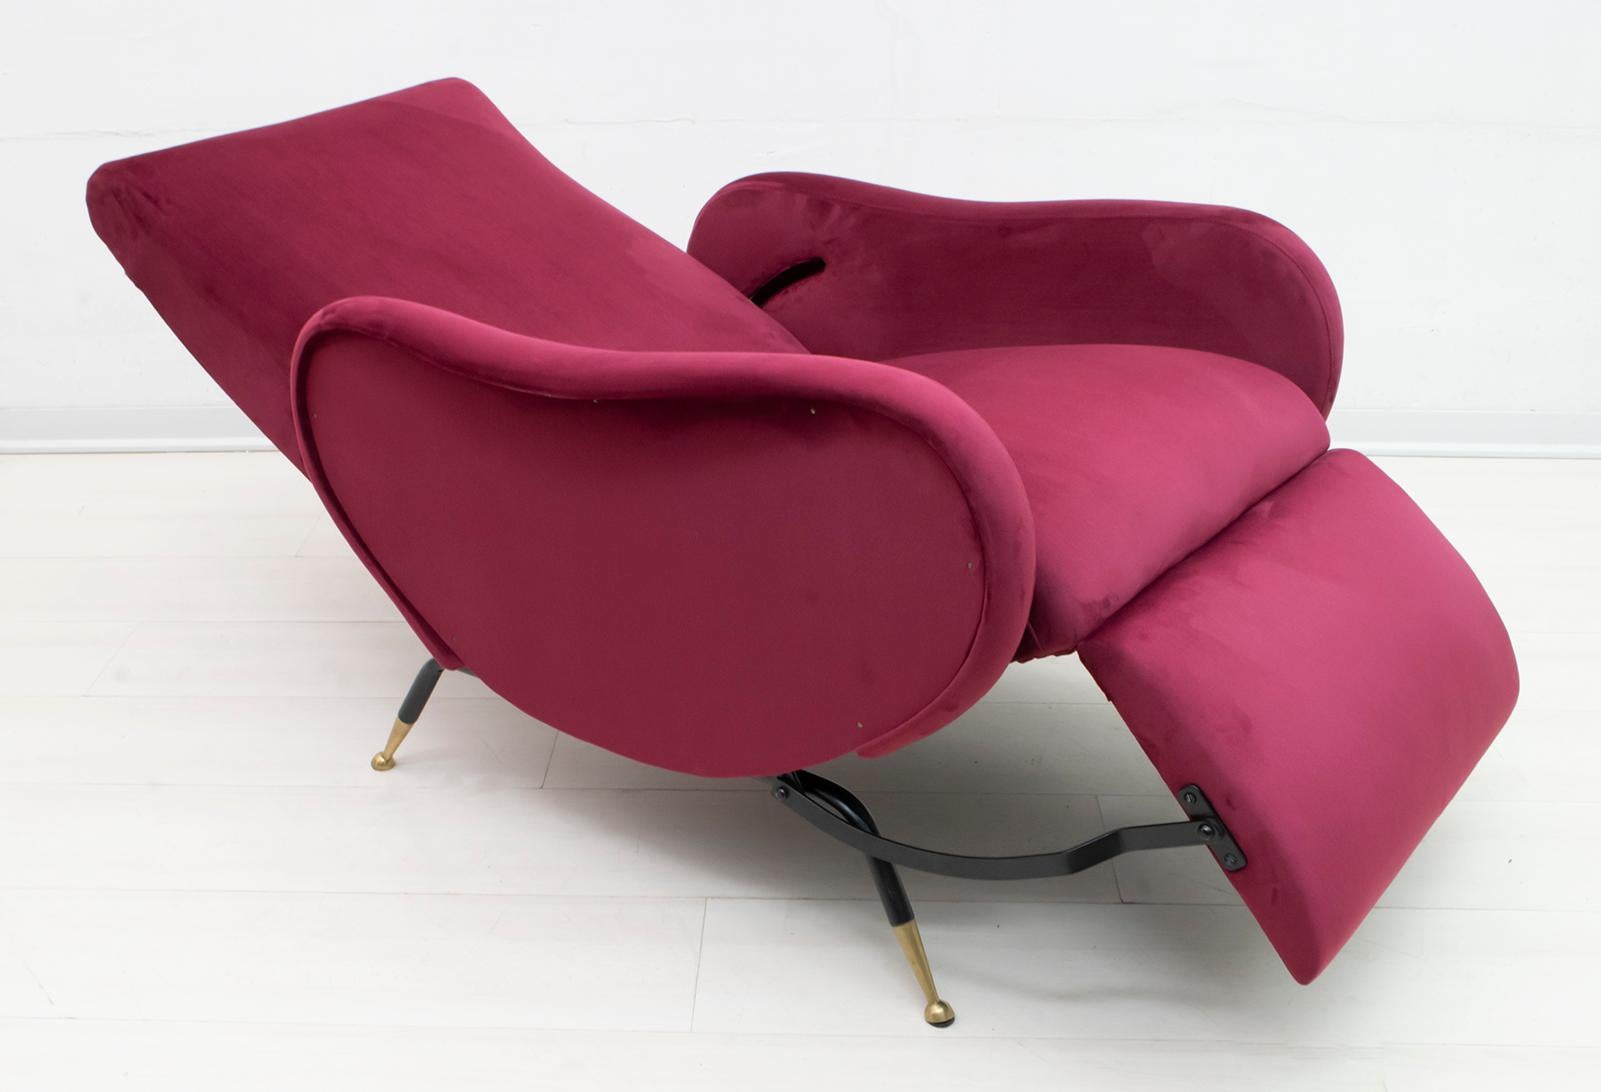 Reclining armchair designed by Marco Zanuso in the 1950s, the armchair has been restored and upholstered in burgundy red velvet

The elongated armchair measures 145 cm.